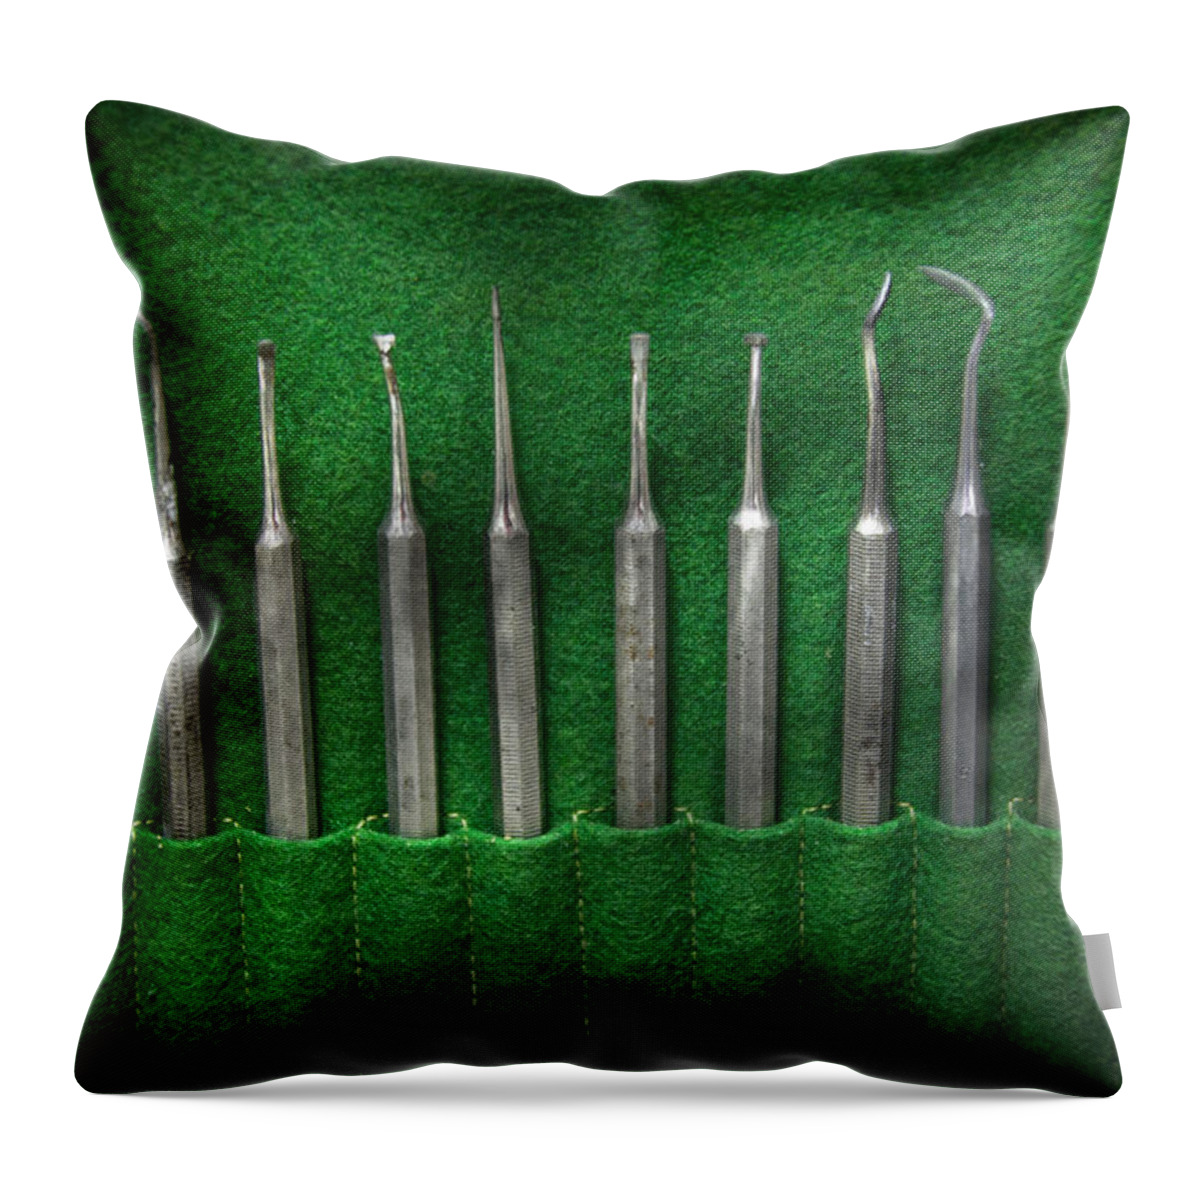 Savad Throw Pillow featuring the photograph Dentist - The kit by Mike Savad